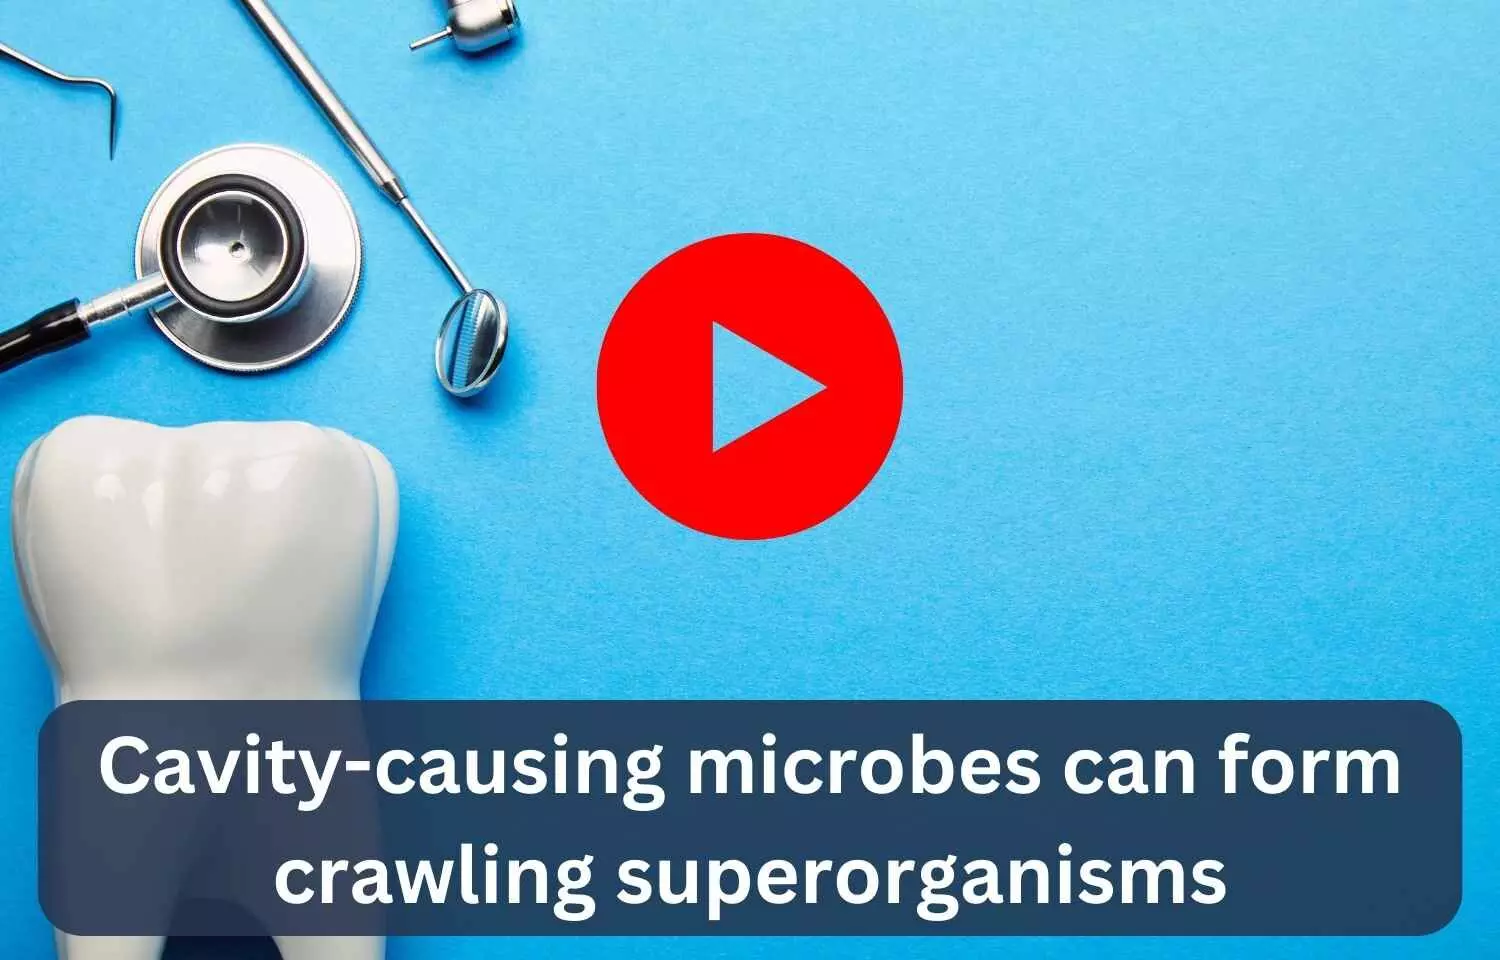 Cavity-causing microbes can form crawling superorganisms